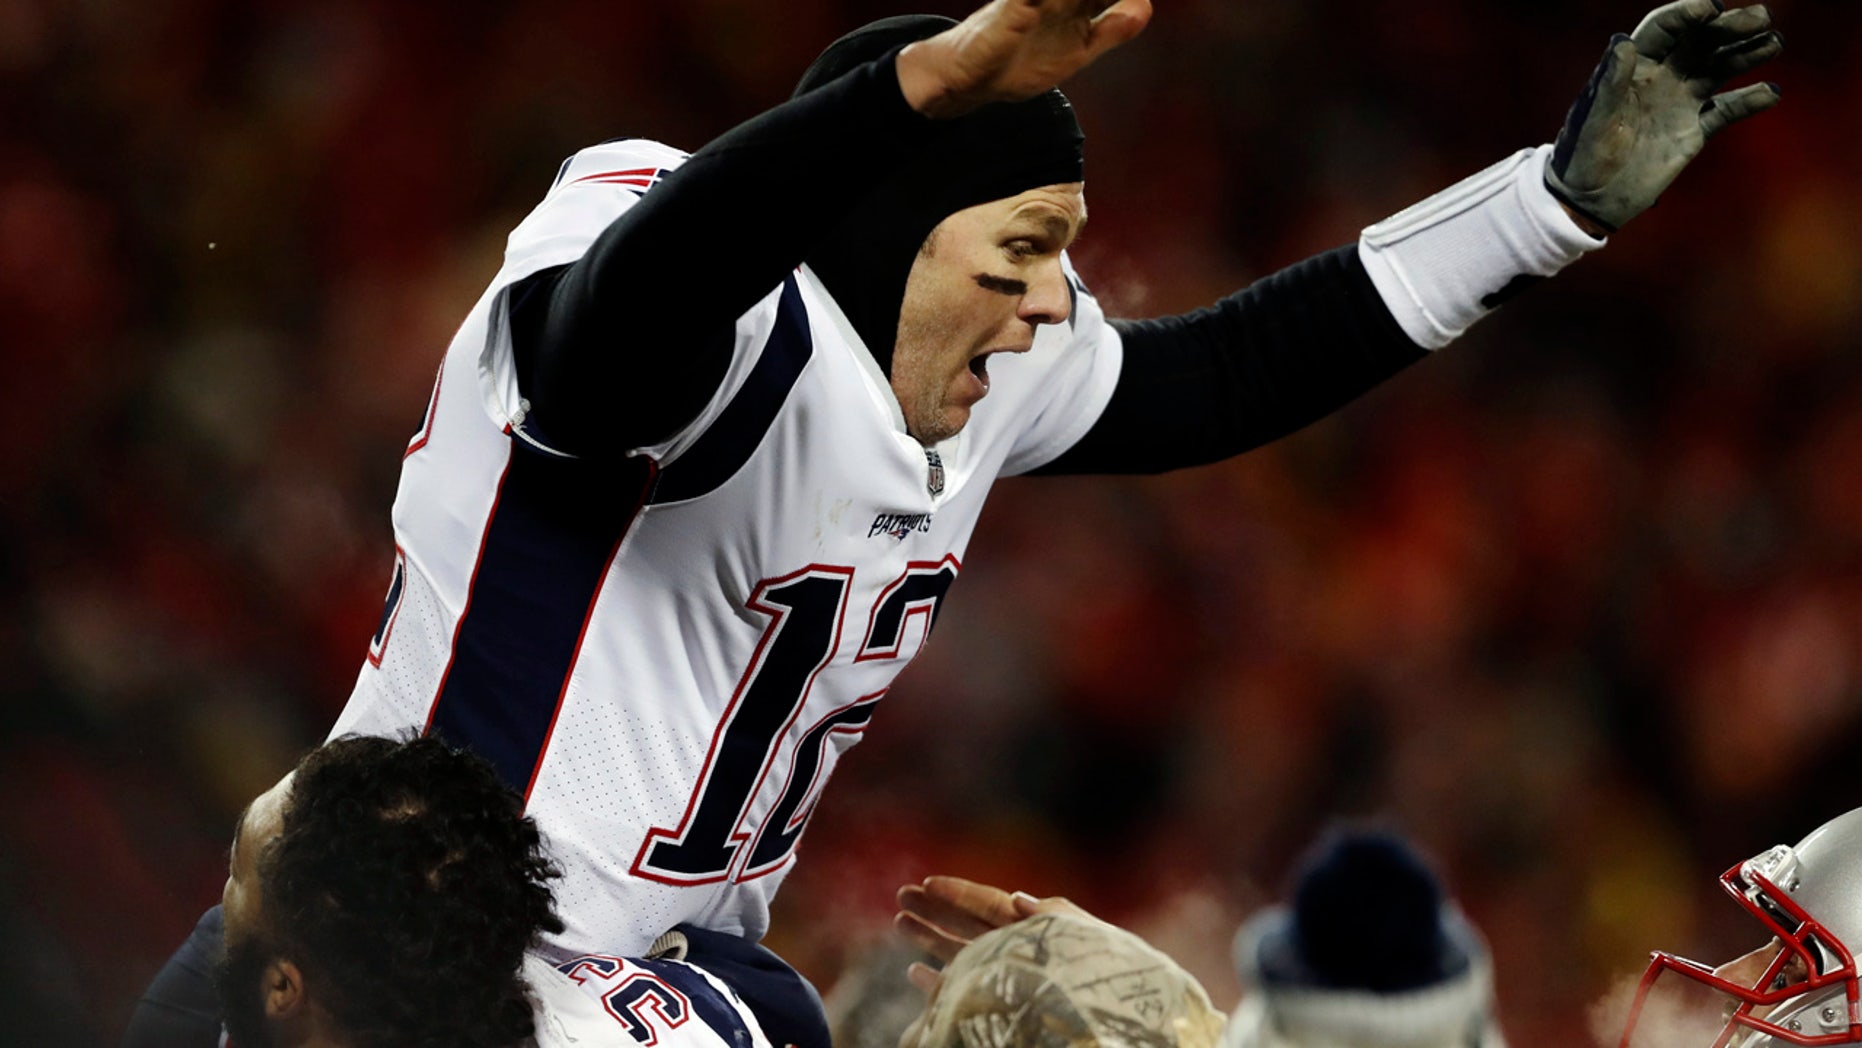 Laser may have been pointed at Tom Brady during AFC Championship game